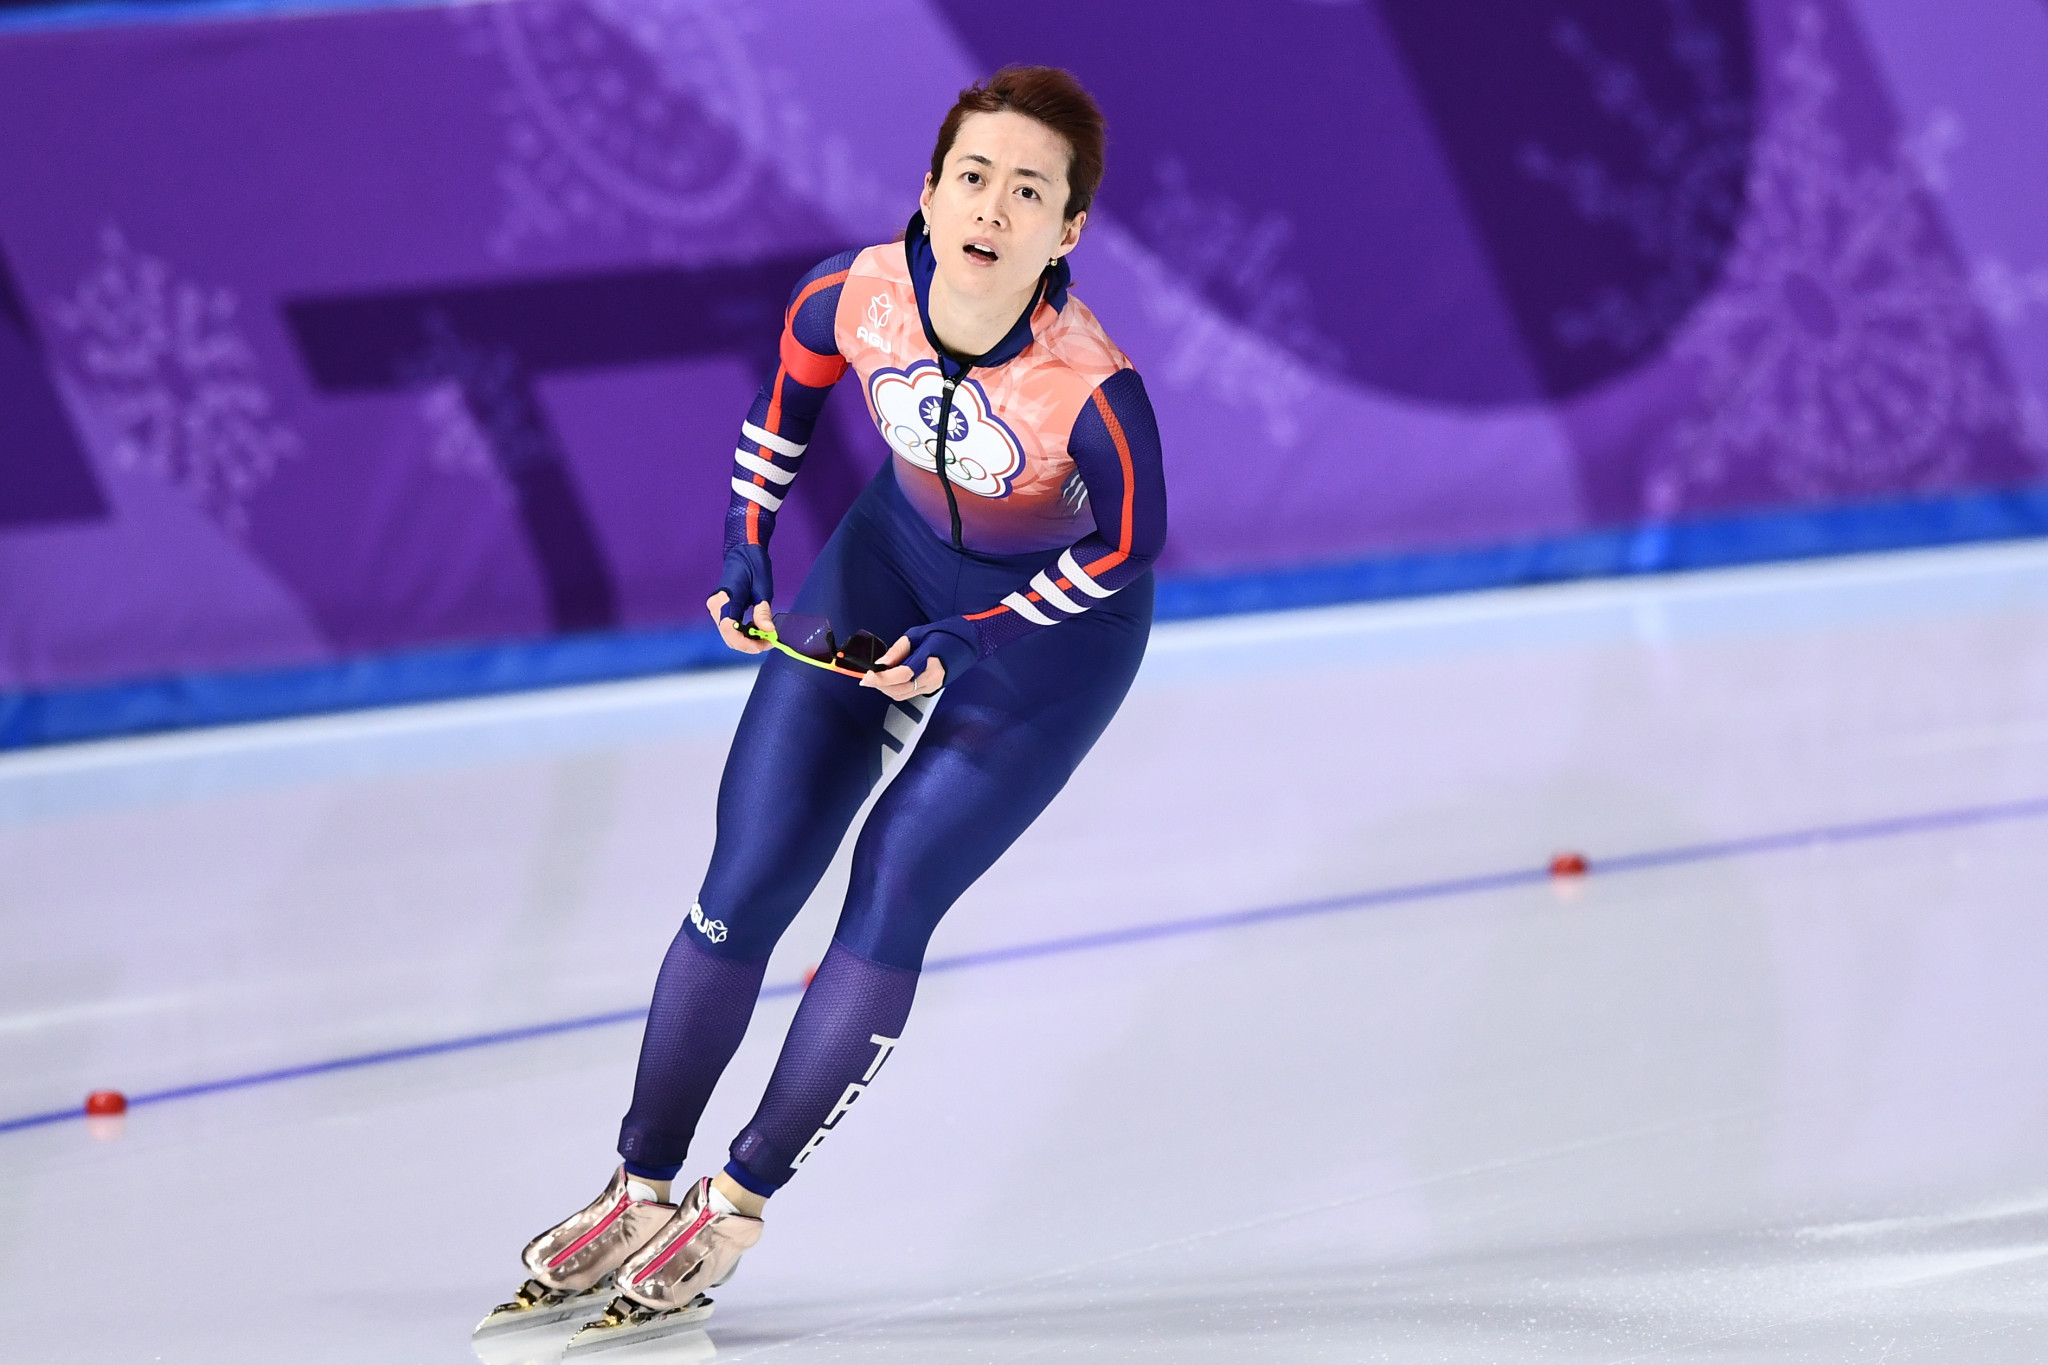 Huang Yu-ting of Chinese Taipei won the women's 1,000m event at the Four Continents Speed Skating Championships ©Getty Images